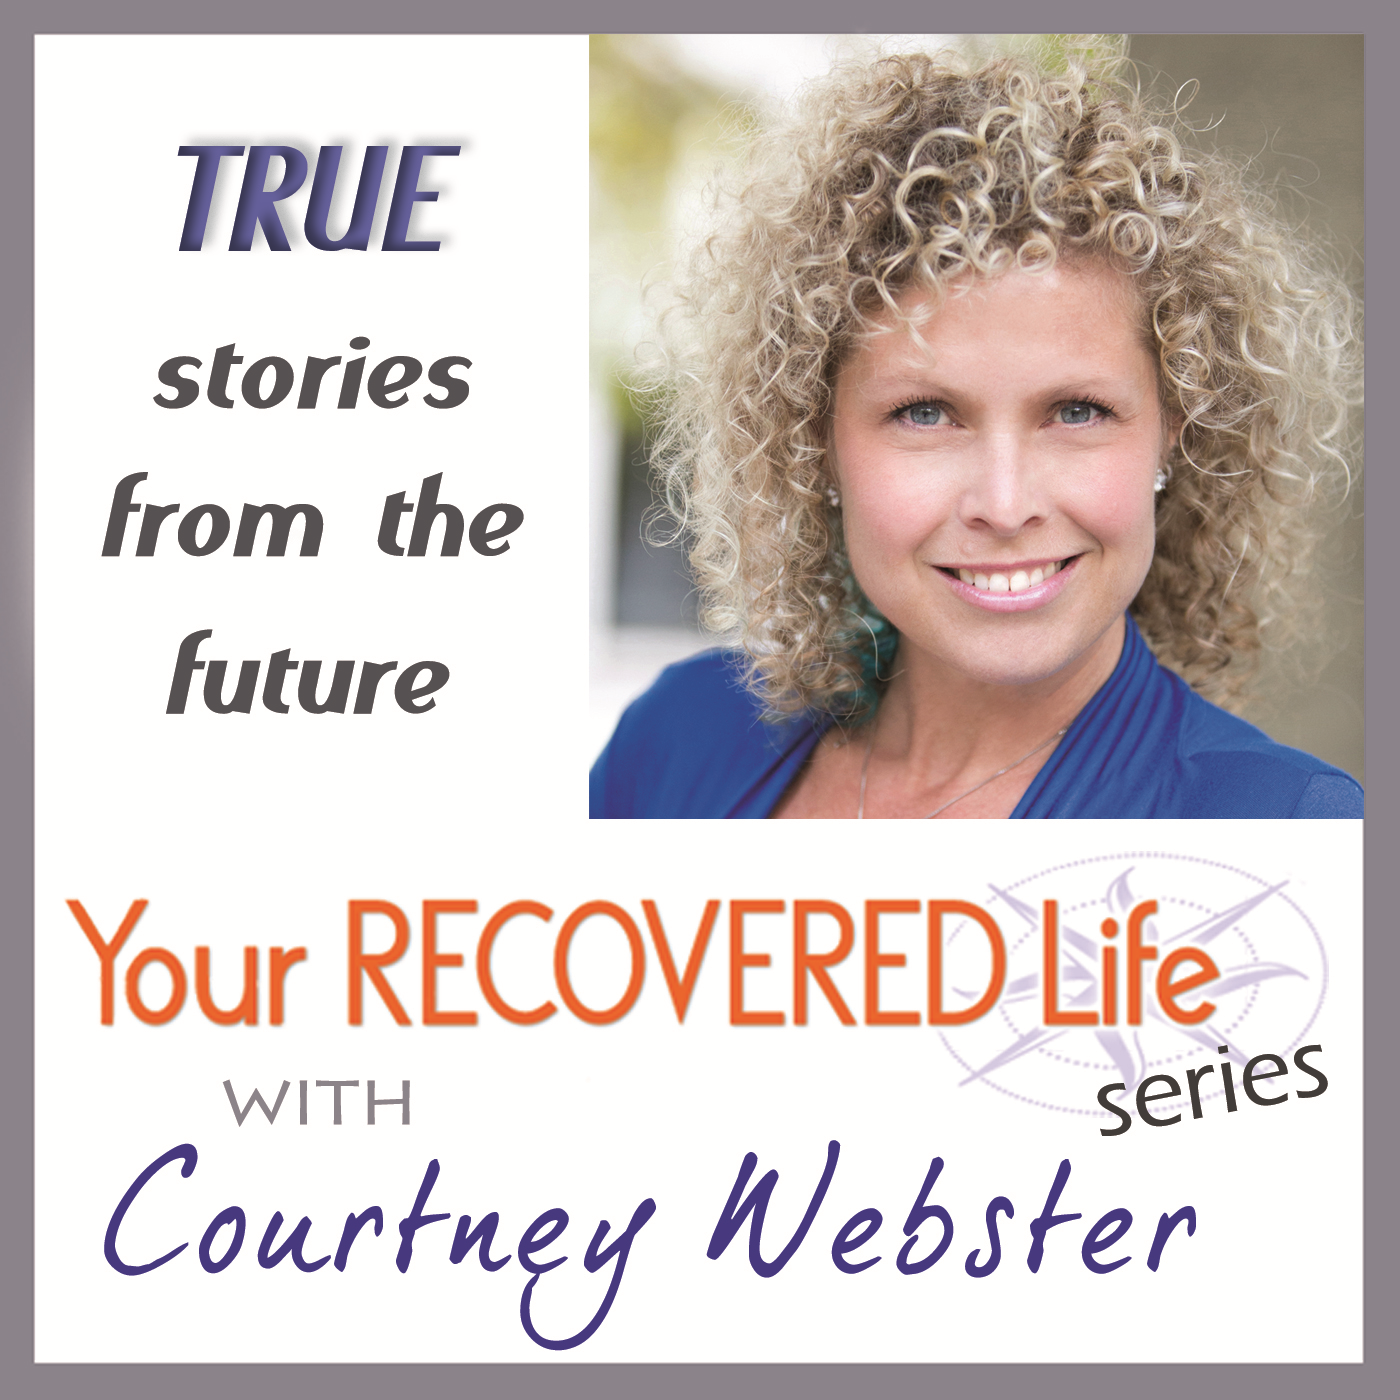 Your Recovered Life Series